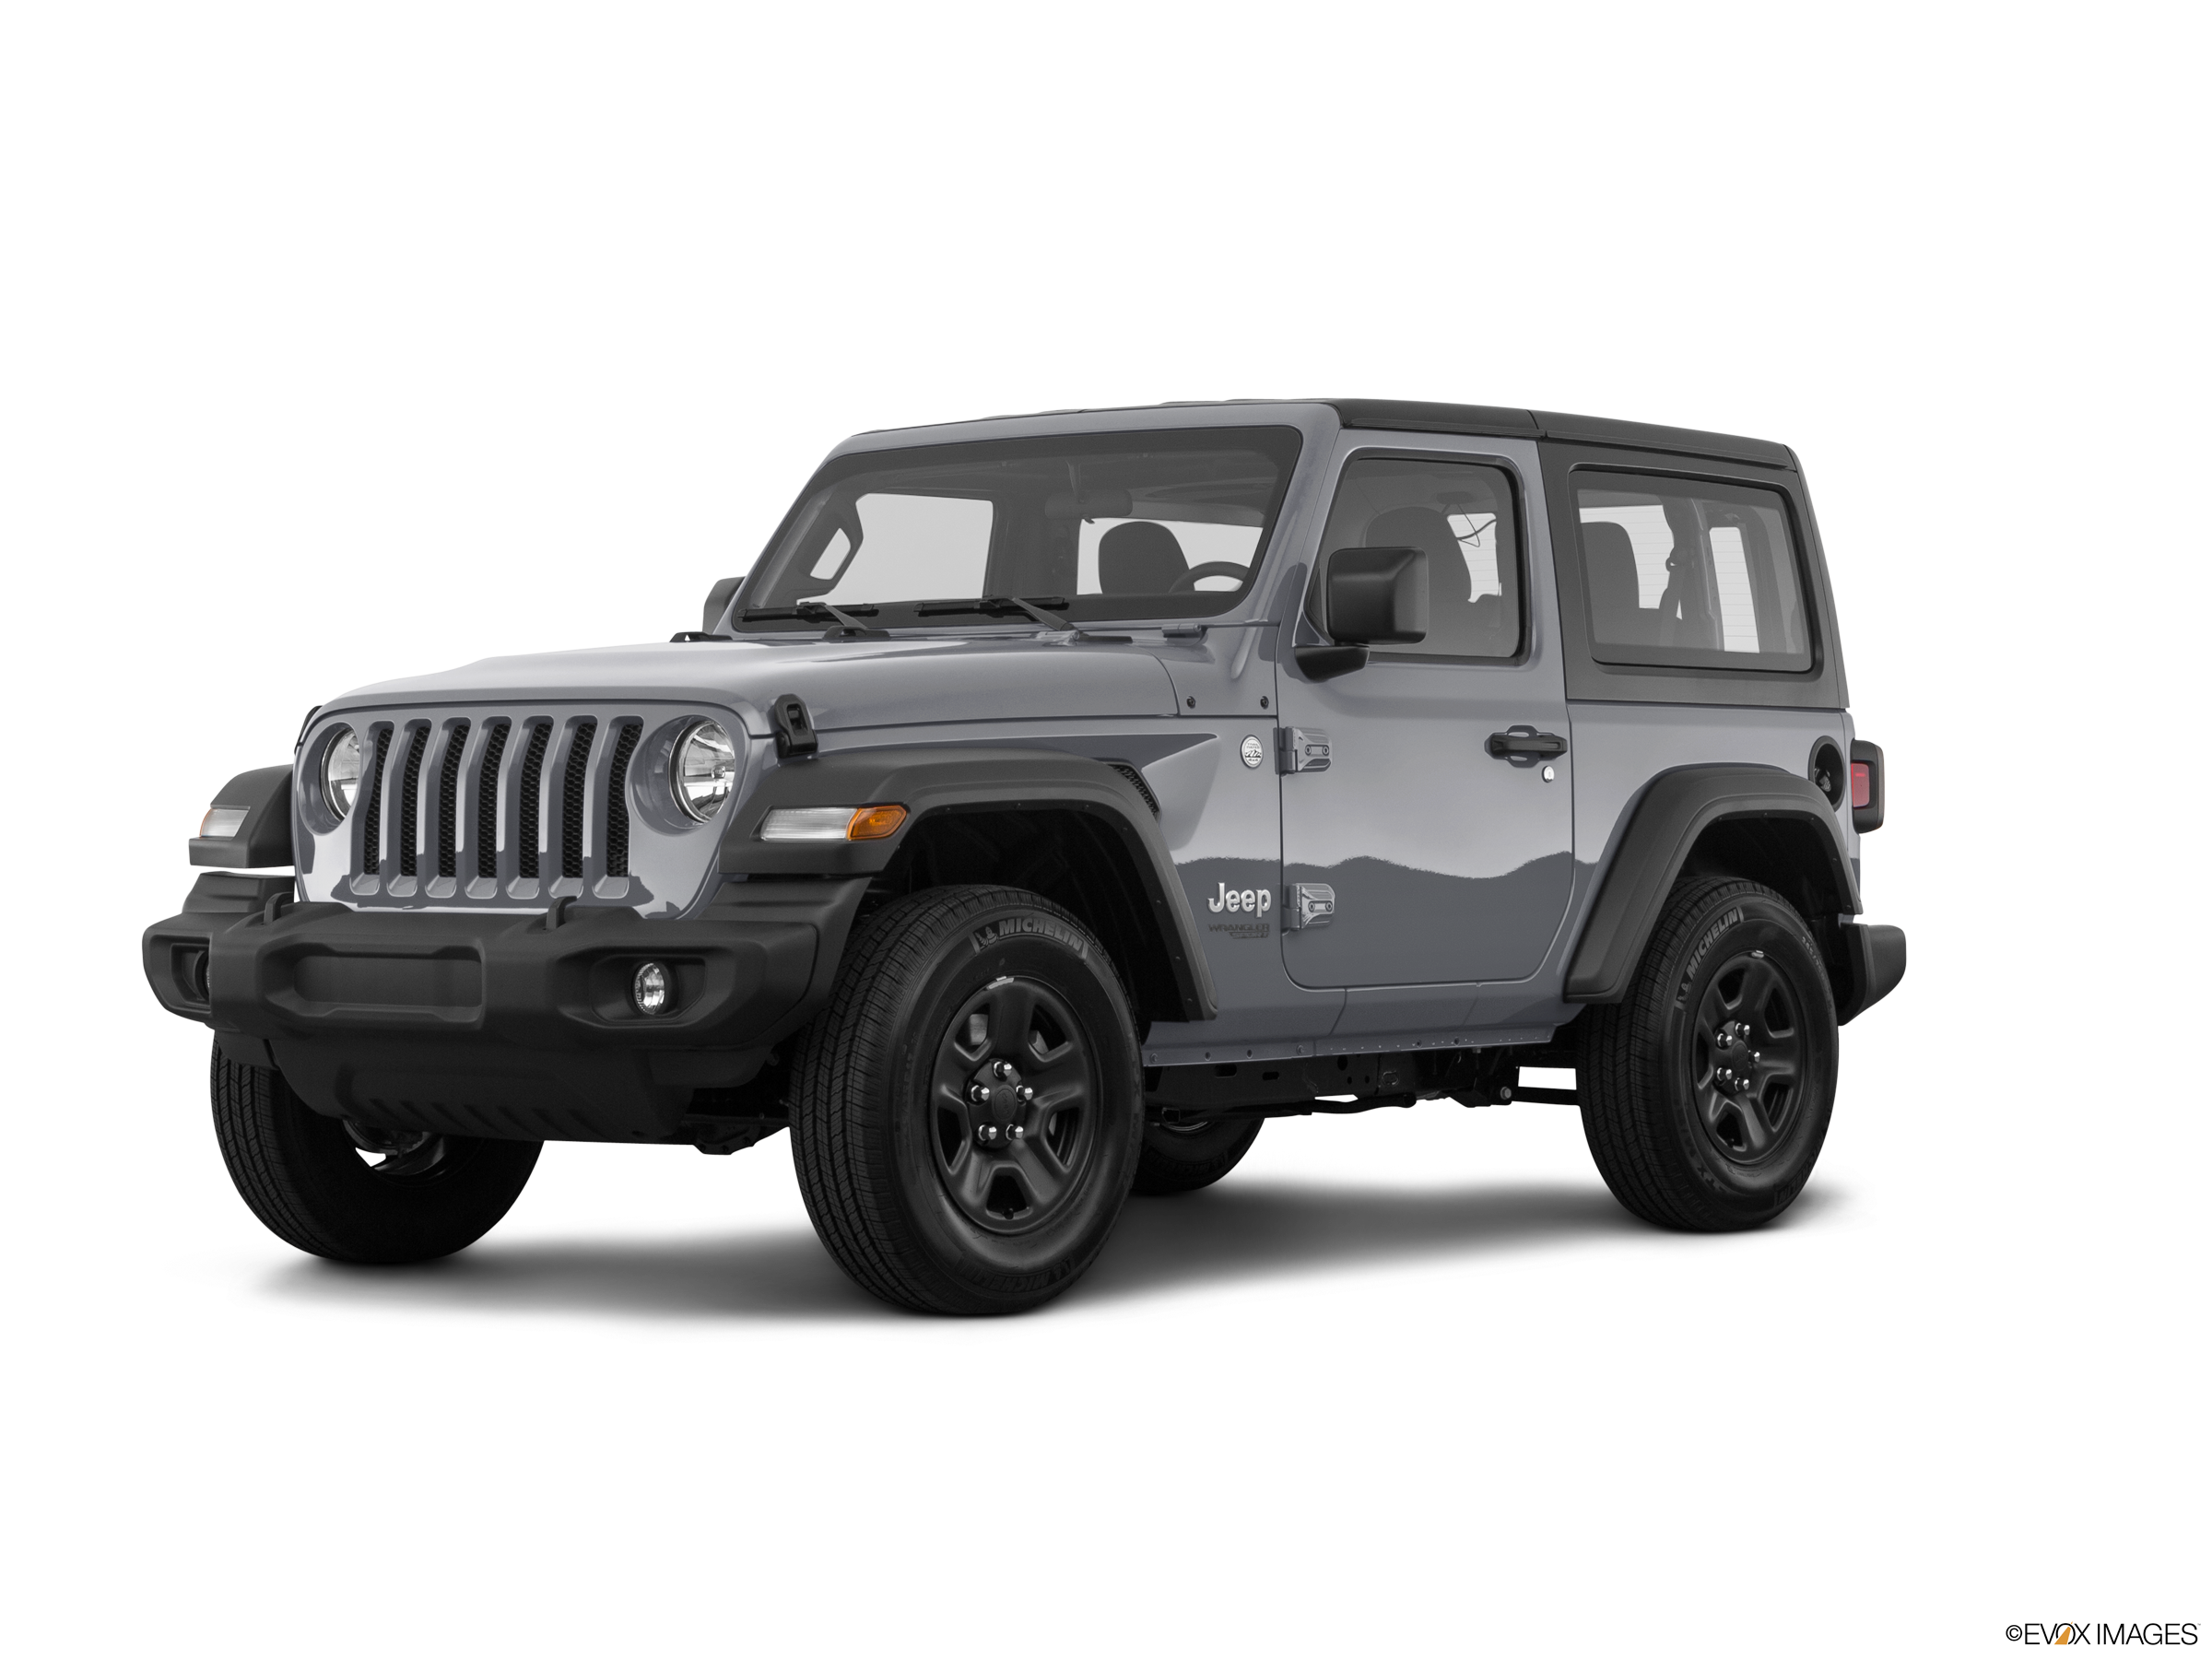 2019 Jeep Wrangler Values & Cars for Sale | Kelley Blue Book